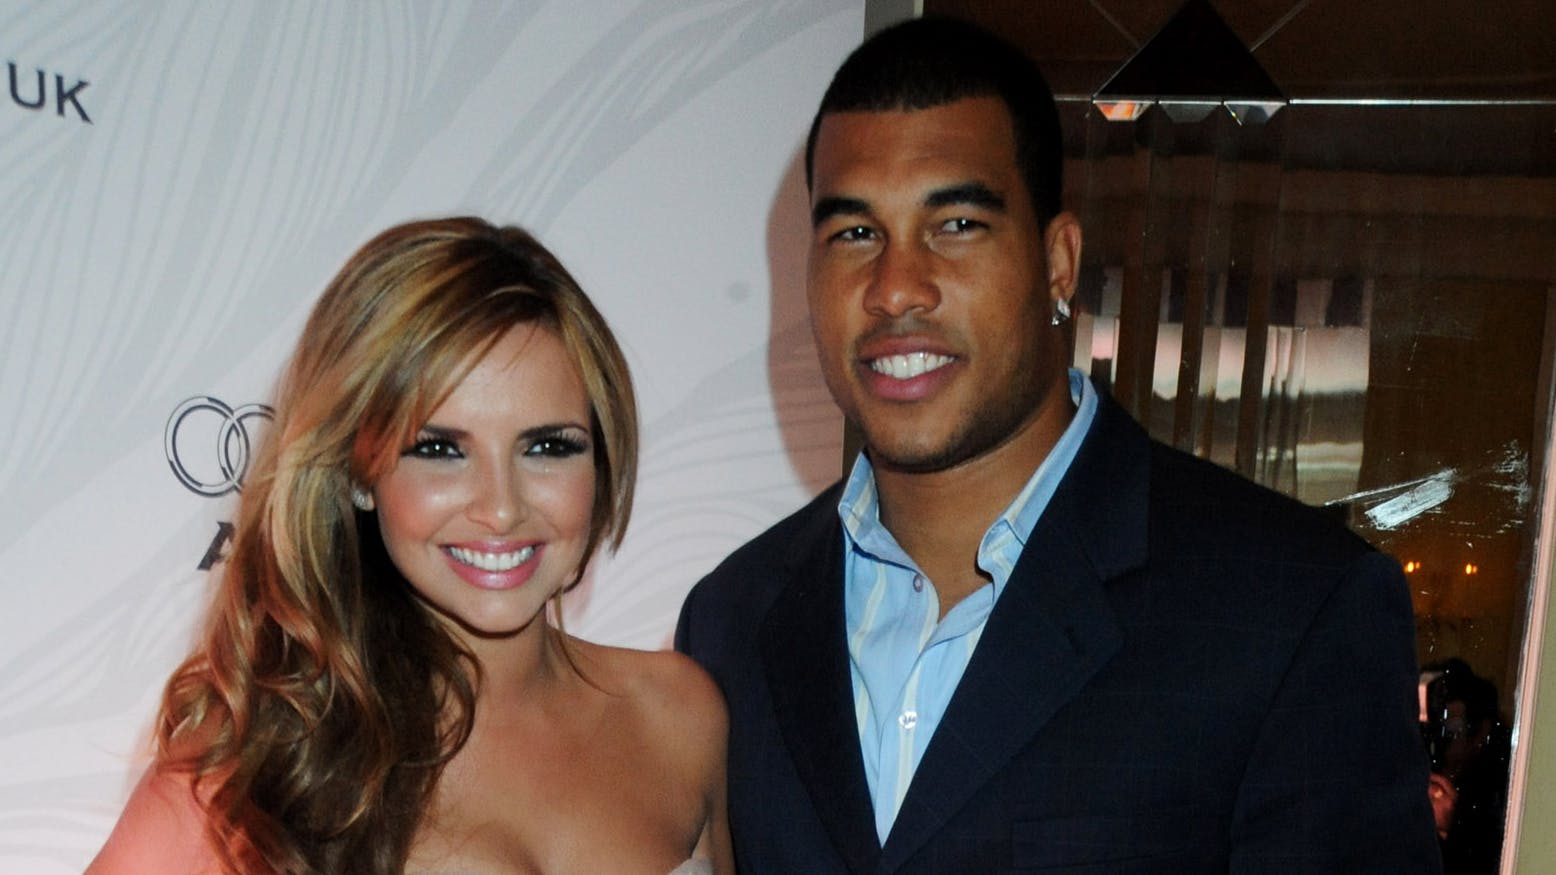 Girls Aloud star Nadine Coyle splits from partner after 11 years Celebrity Closer photo